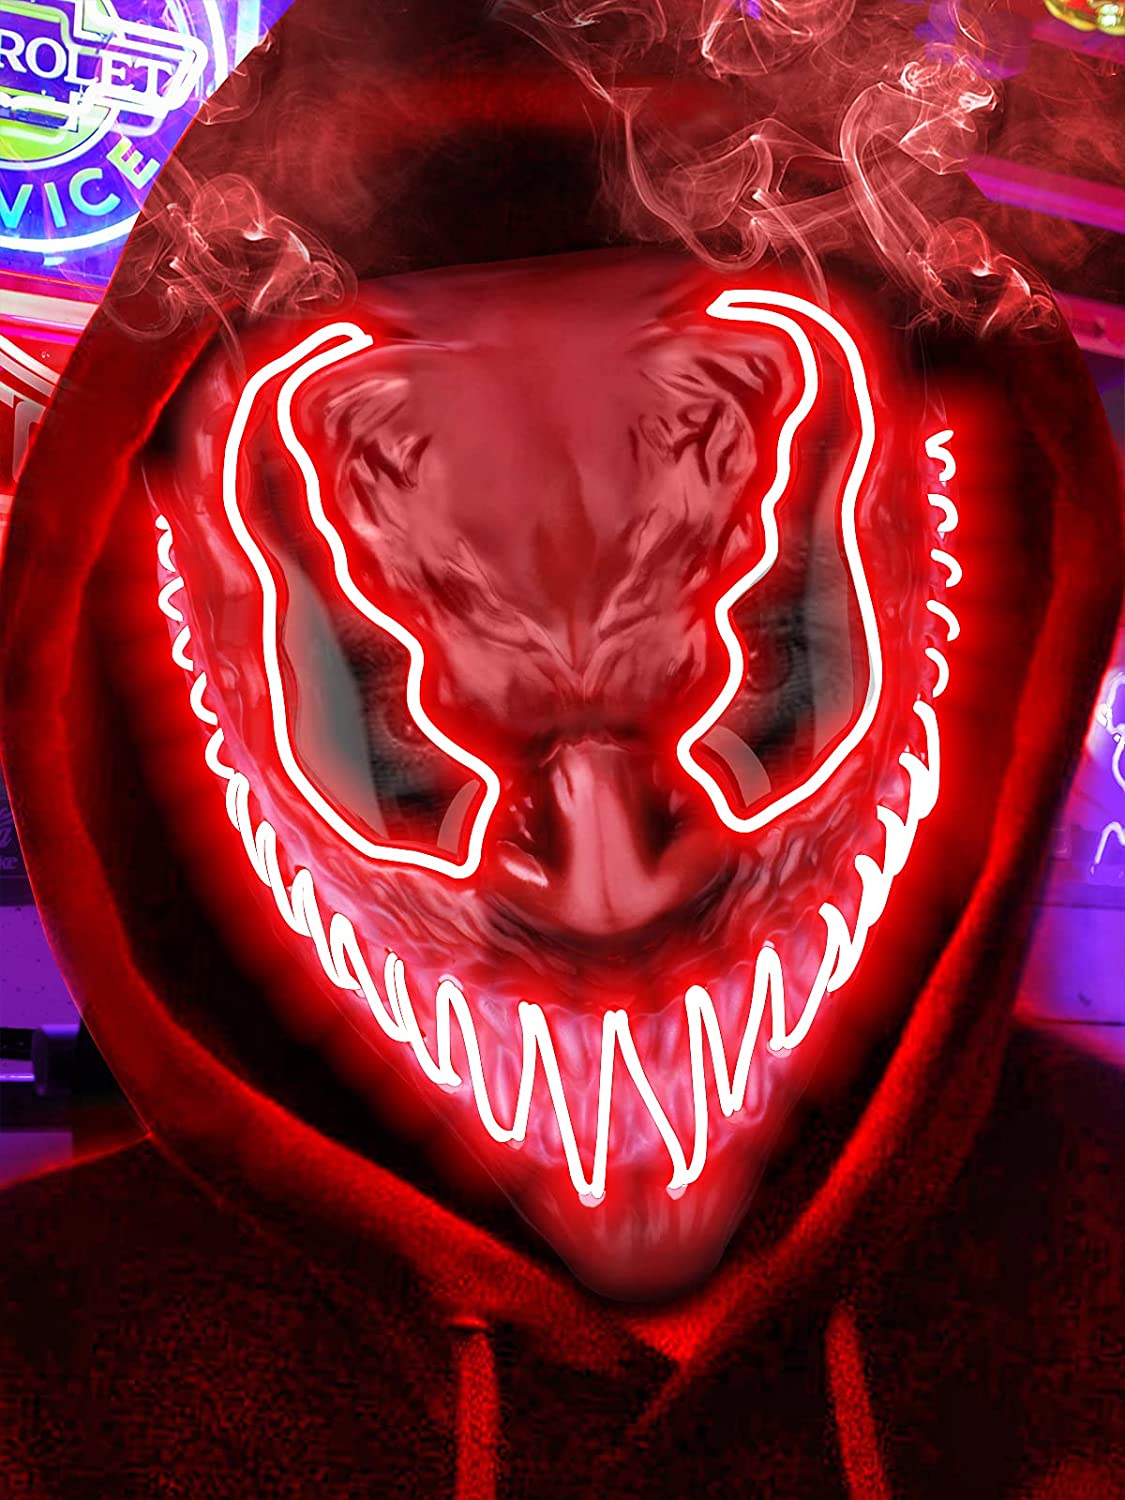 Halloween Mask Scary Led Light Up Mask for Festival Cosplay, Costume Masquerade Parties Carnival